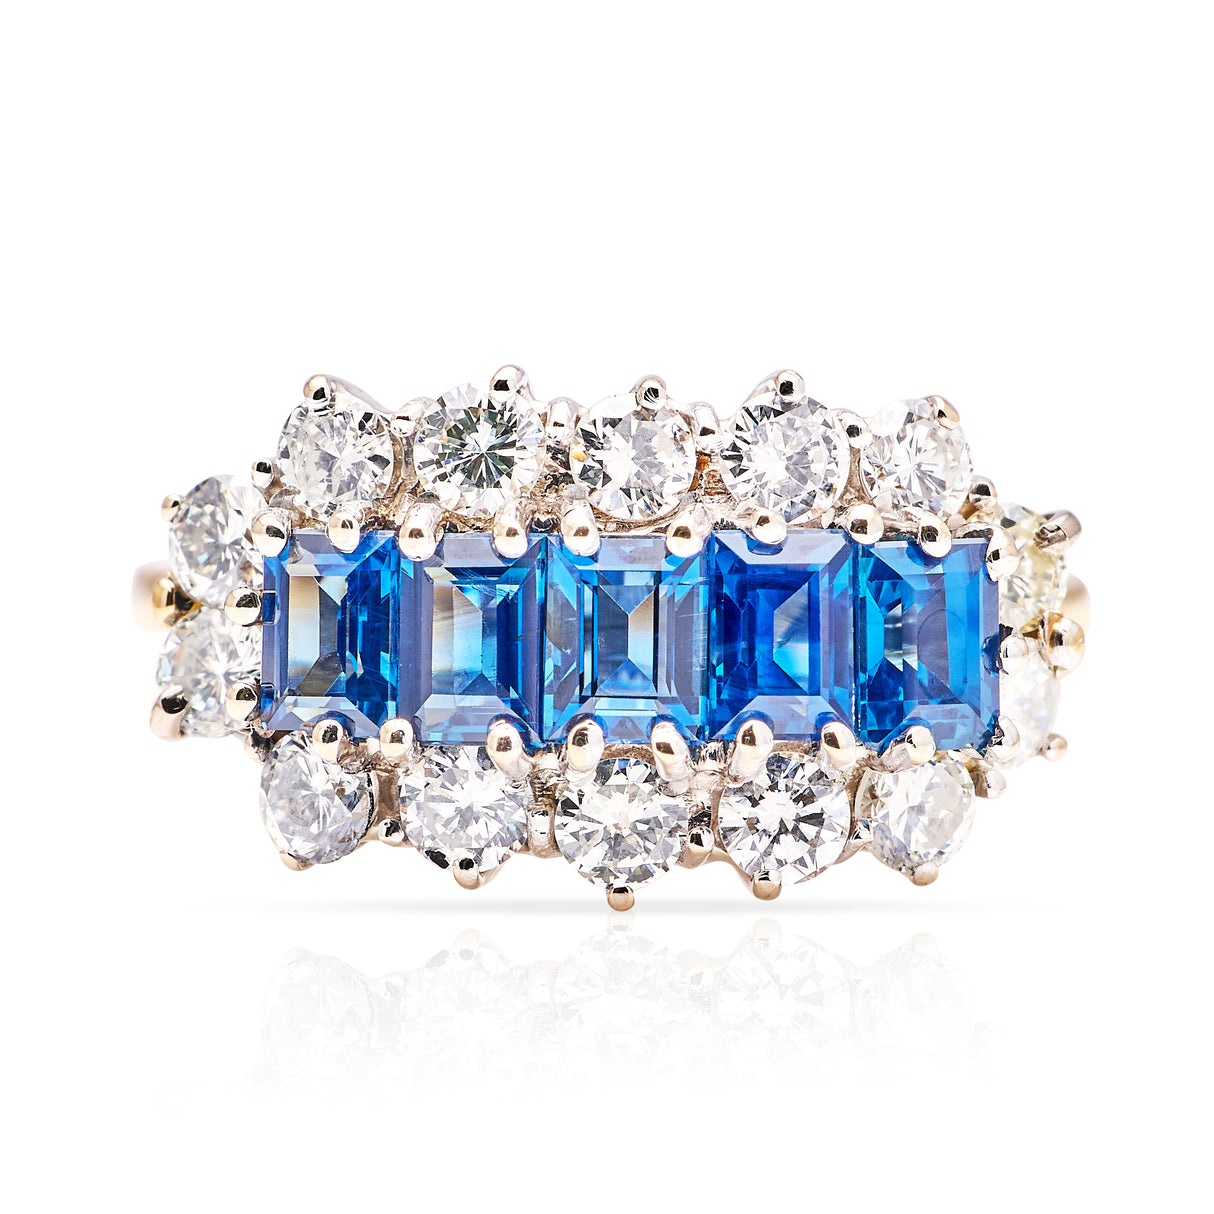 Vintage, 1950s sapphire and diamond cocktail ring, 18ct yellow gold and platinum